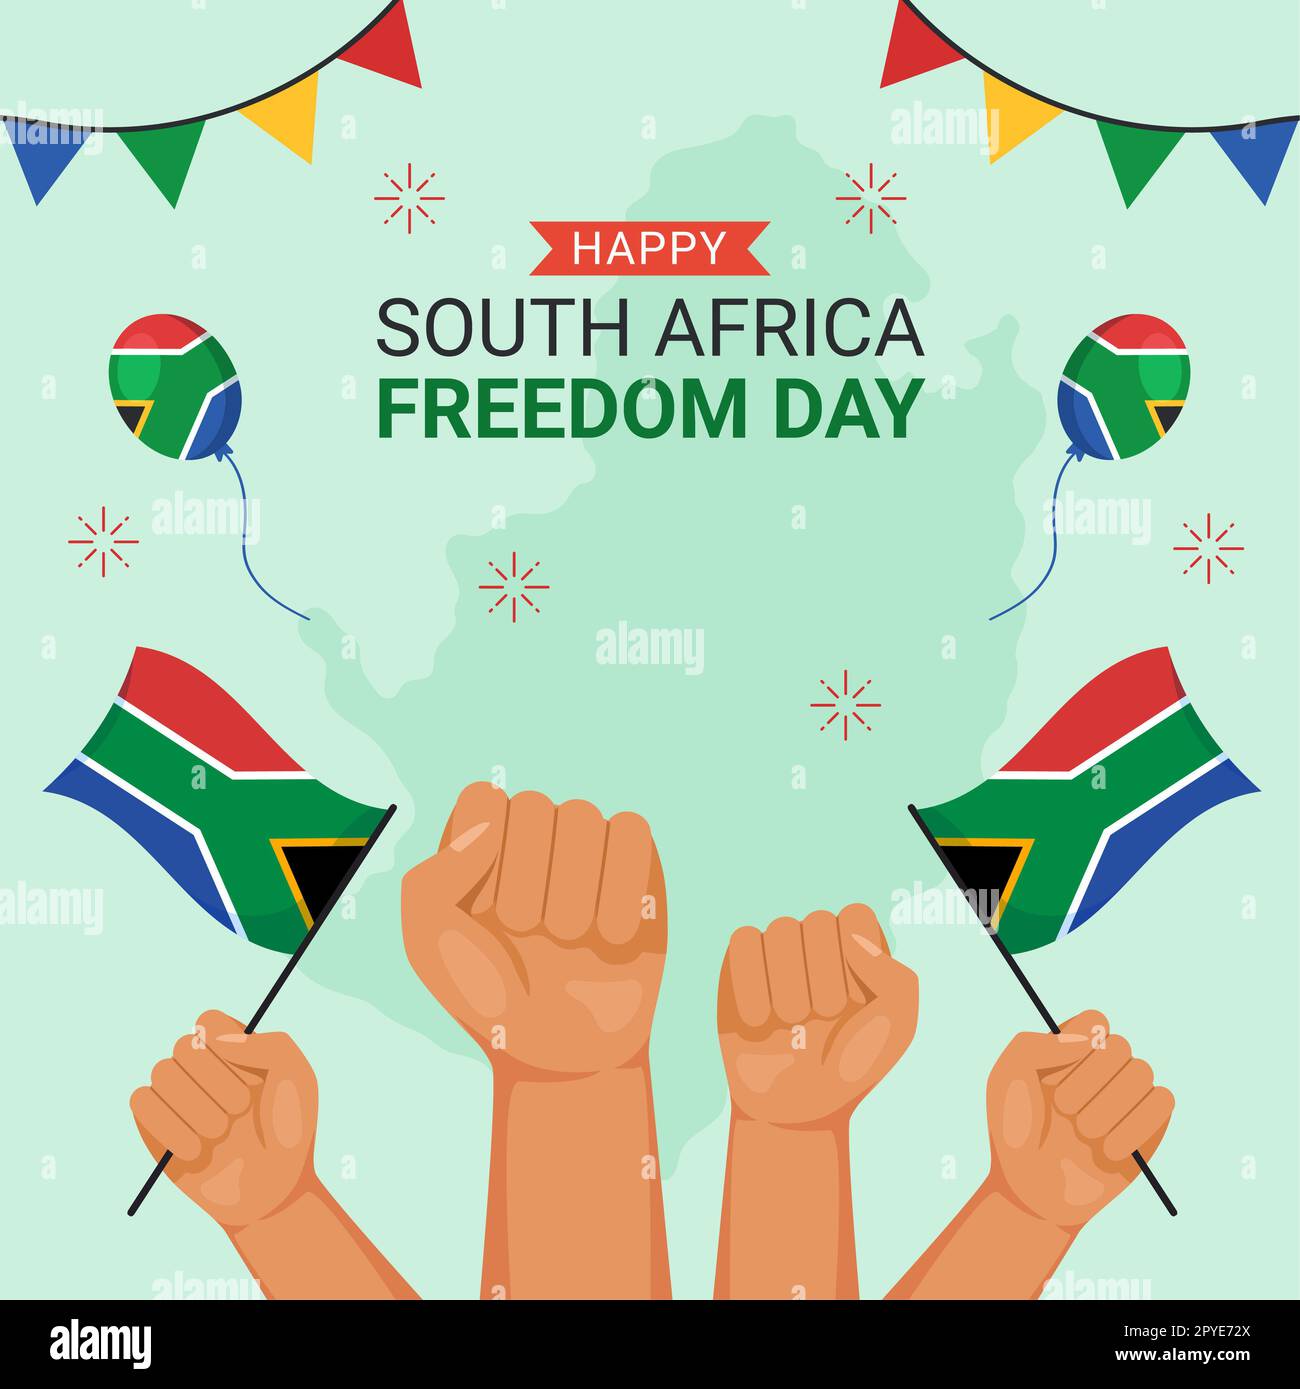 Happy South Africa Freedom Day Social Media Background Illustration Hand Drawn Templates Stock 1011